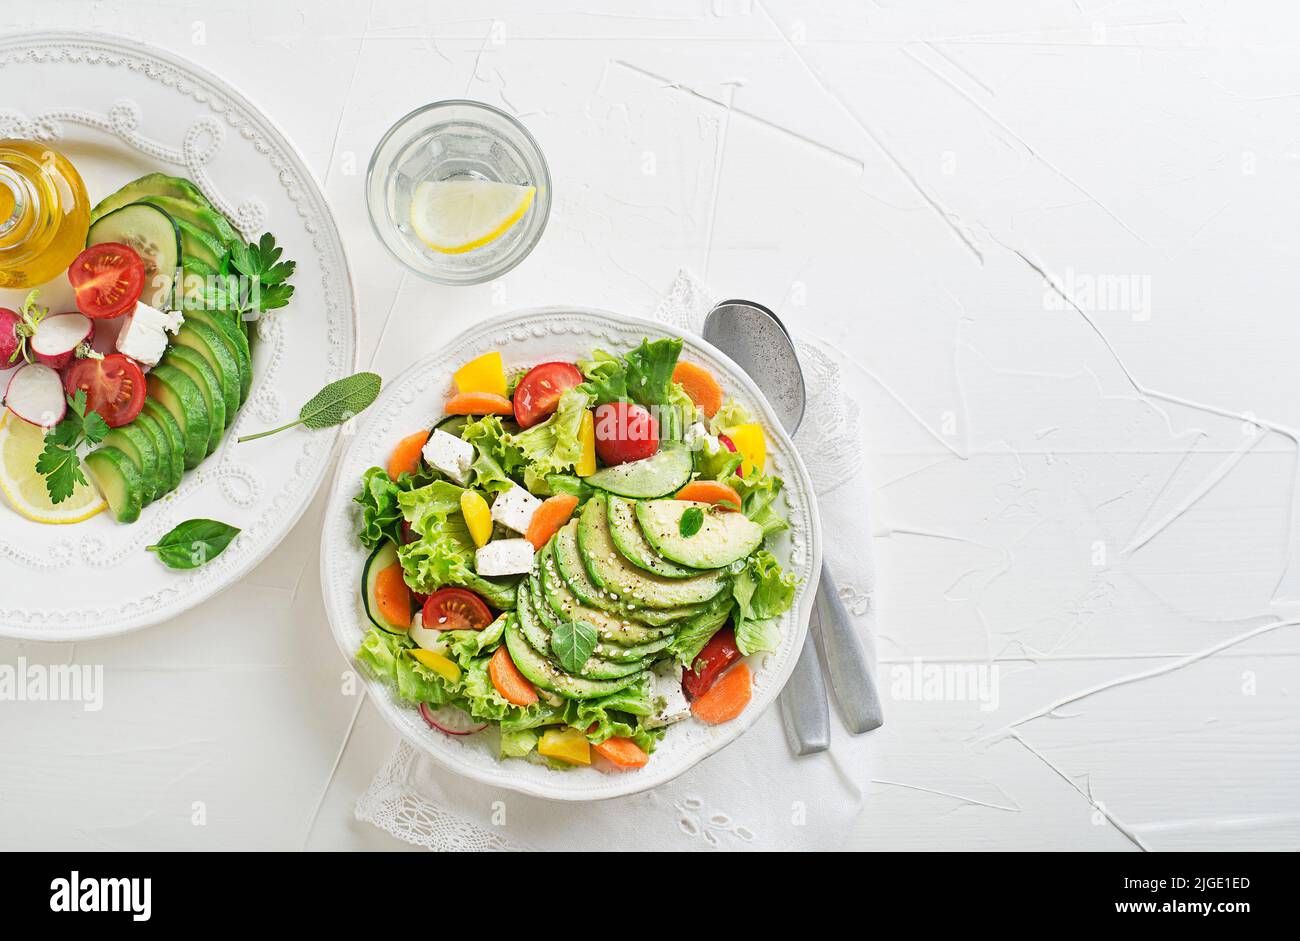 Healthy green salad with avocado, feta cheese and fresh vegetables on white background Stock Photo